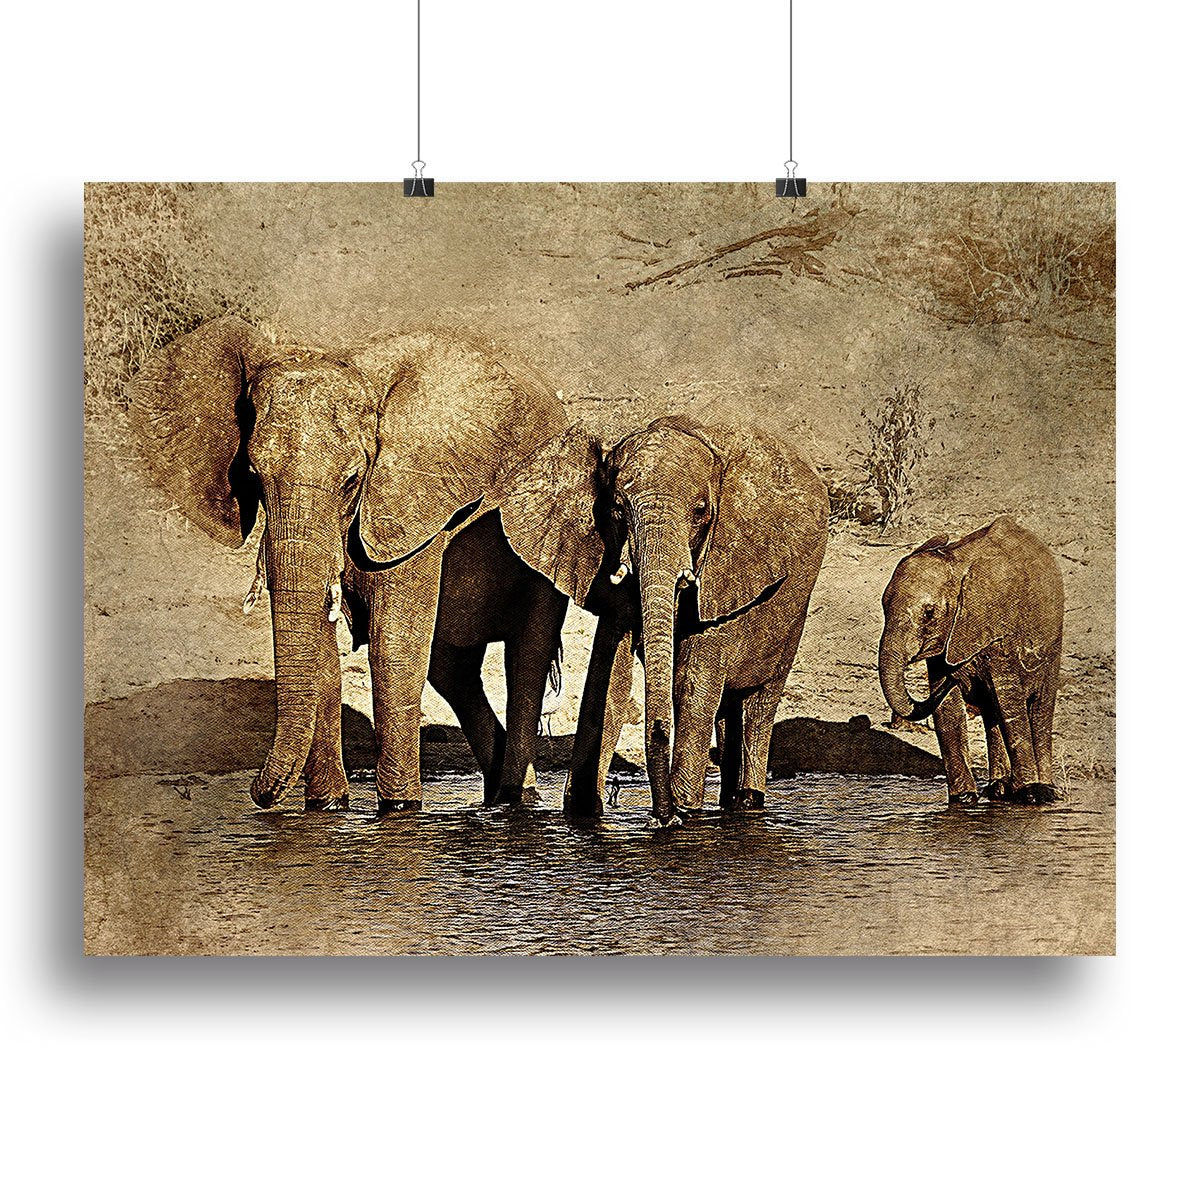 The Elephants March Version 2 Canvas Print or Poster